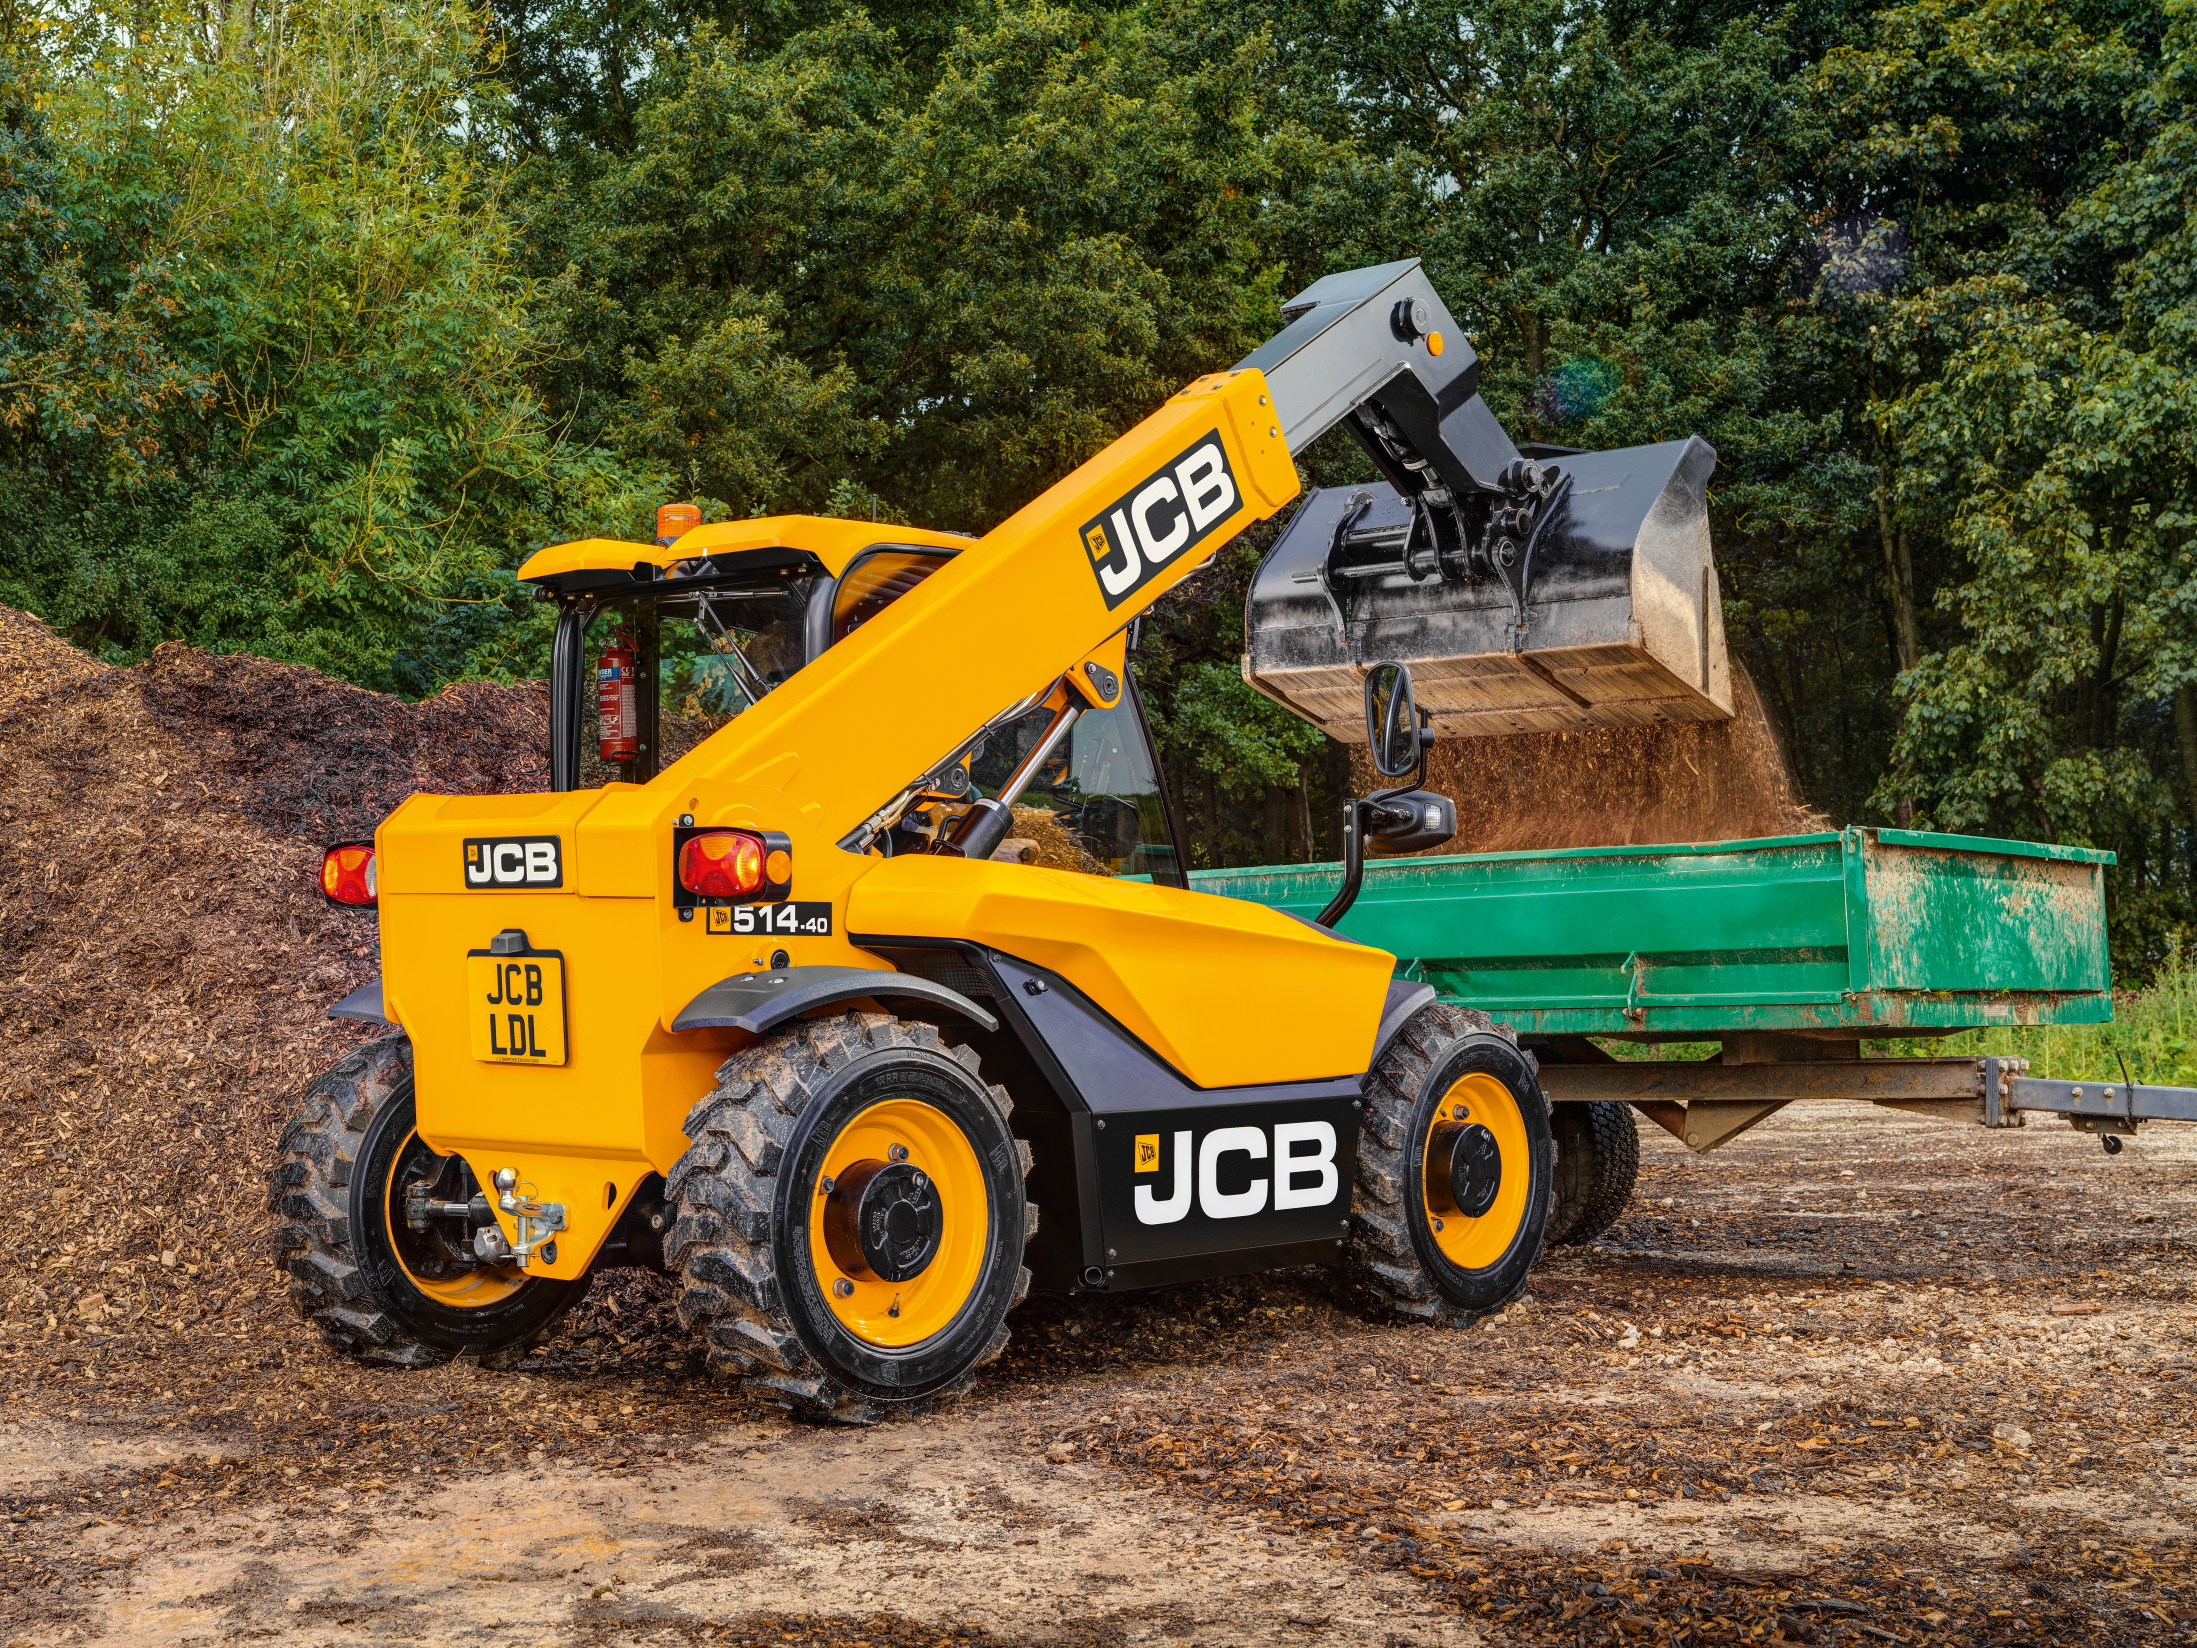 Smallest compact loadall joins JCB line-up with largest cab